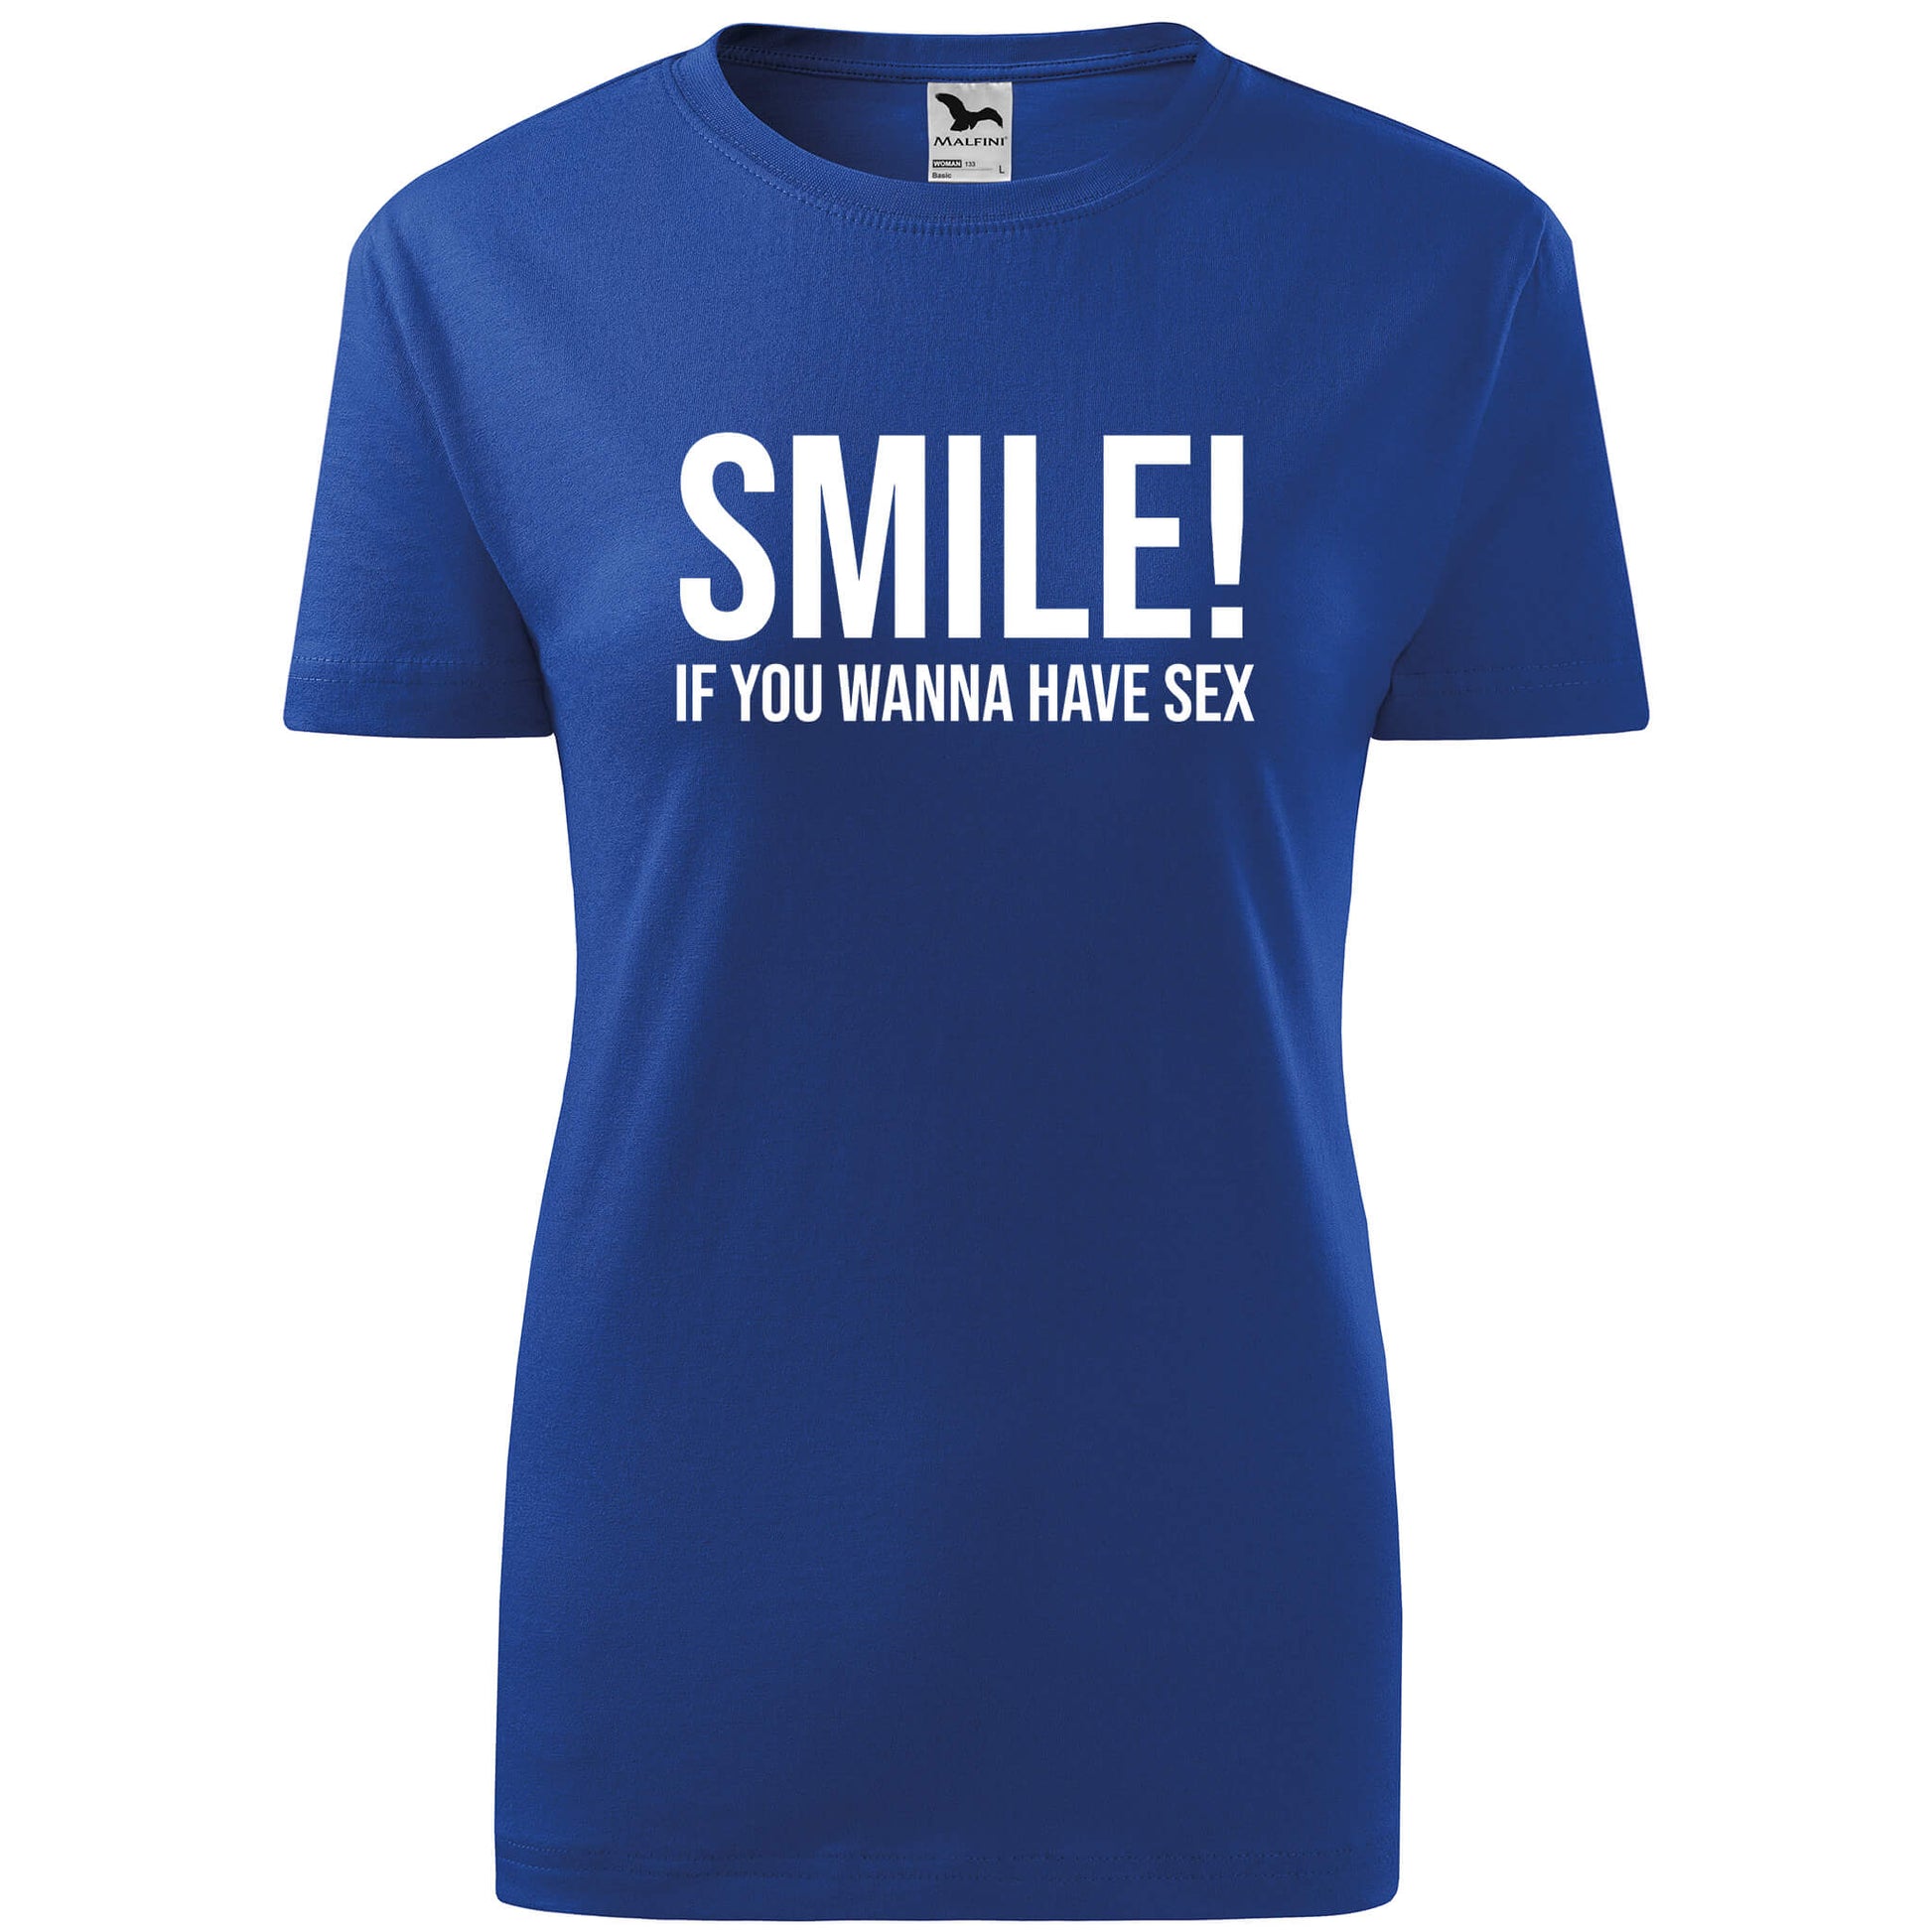 T-shirt - Smile! If you wanna have sex - rvdesignprint